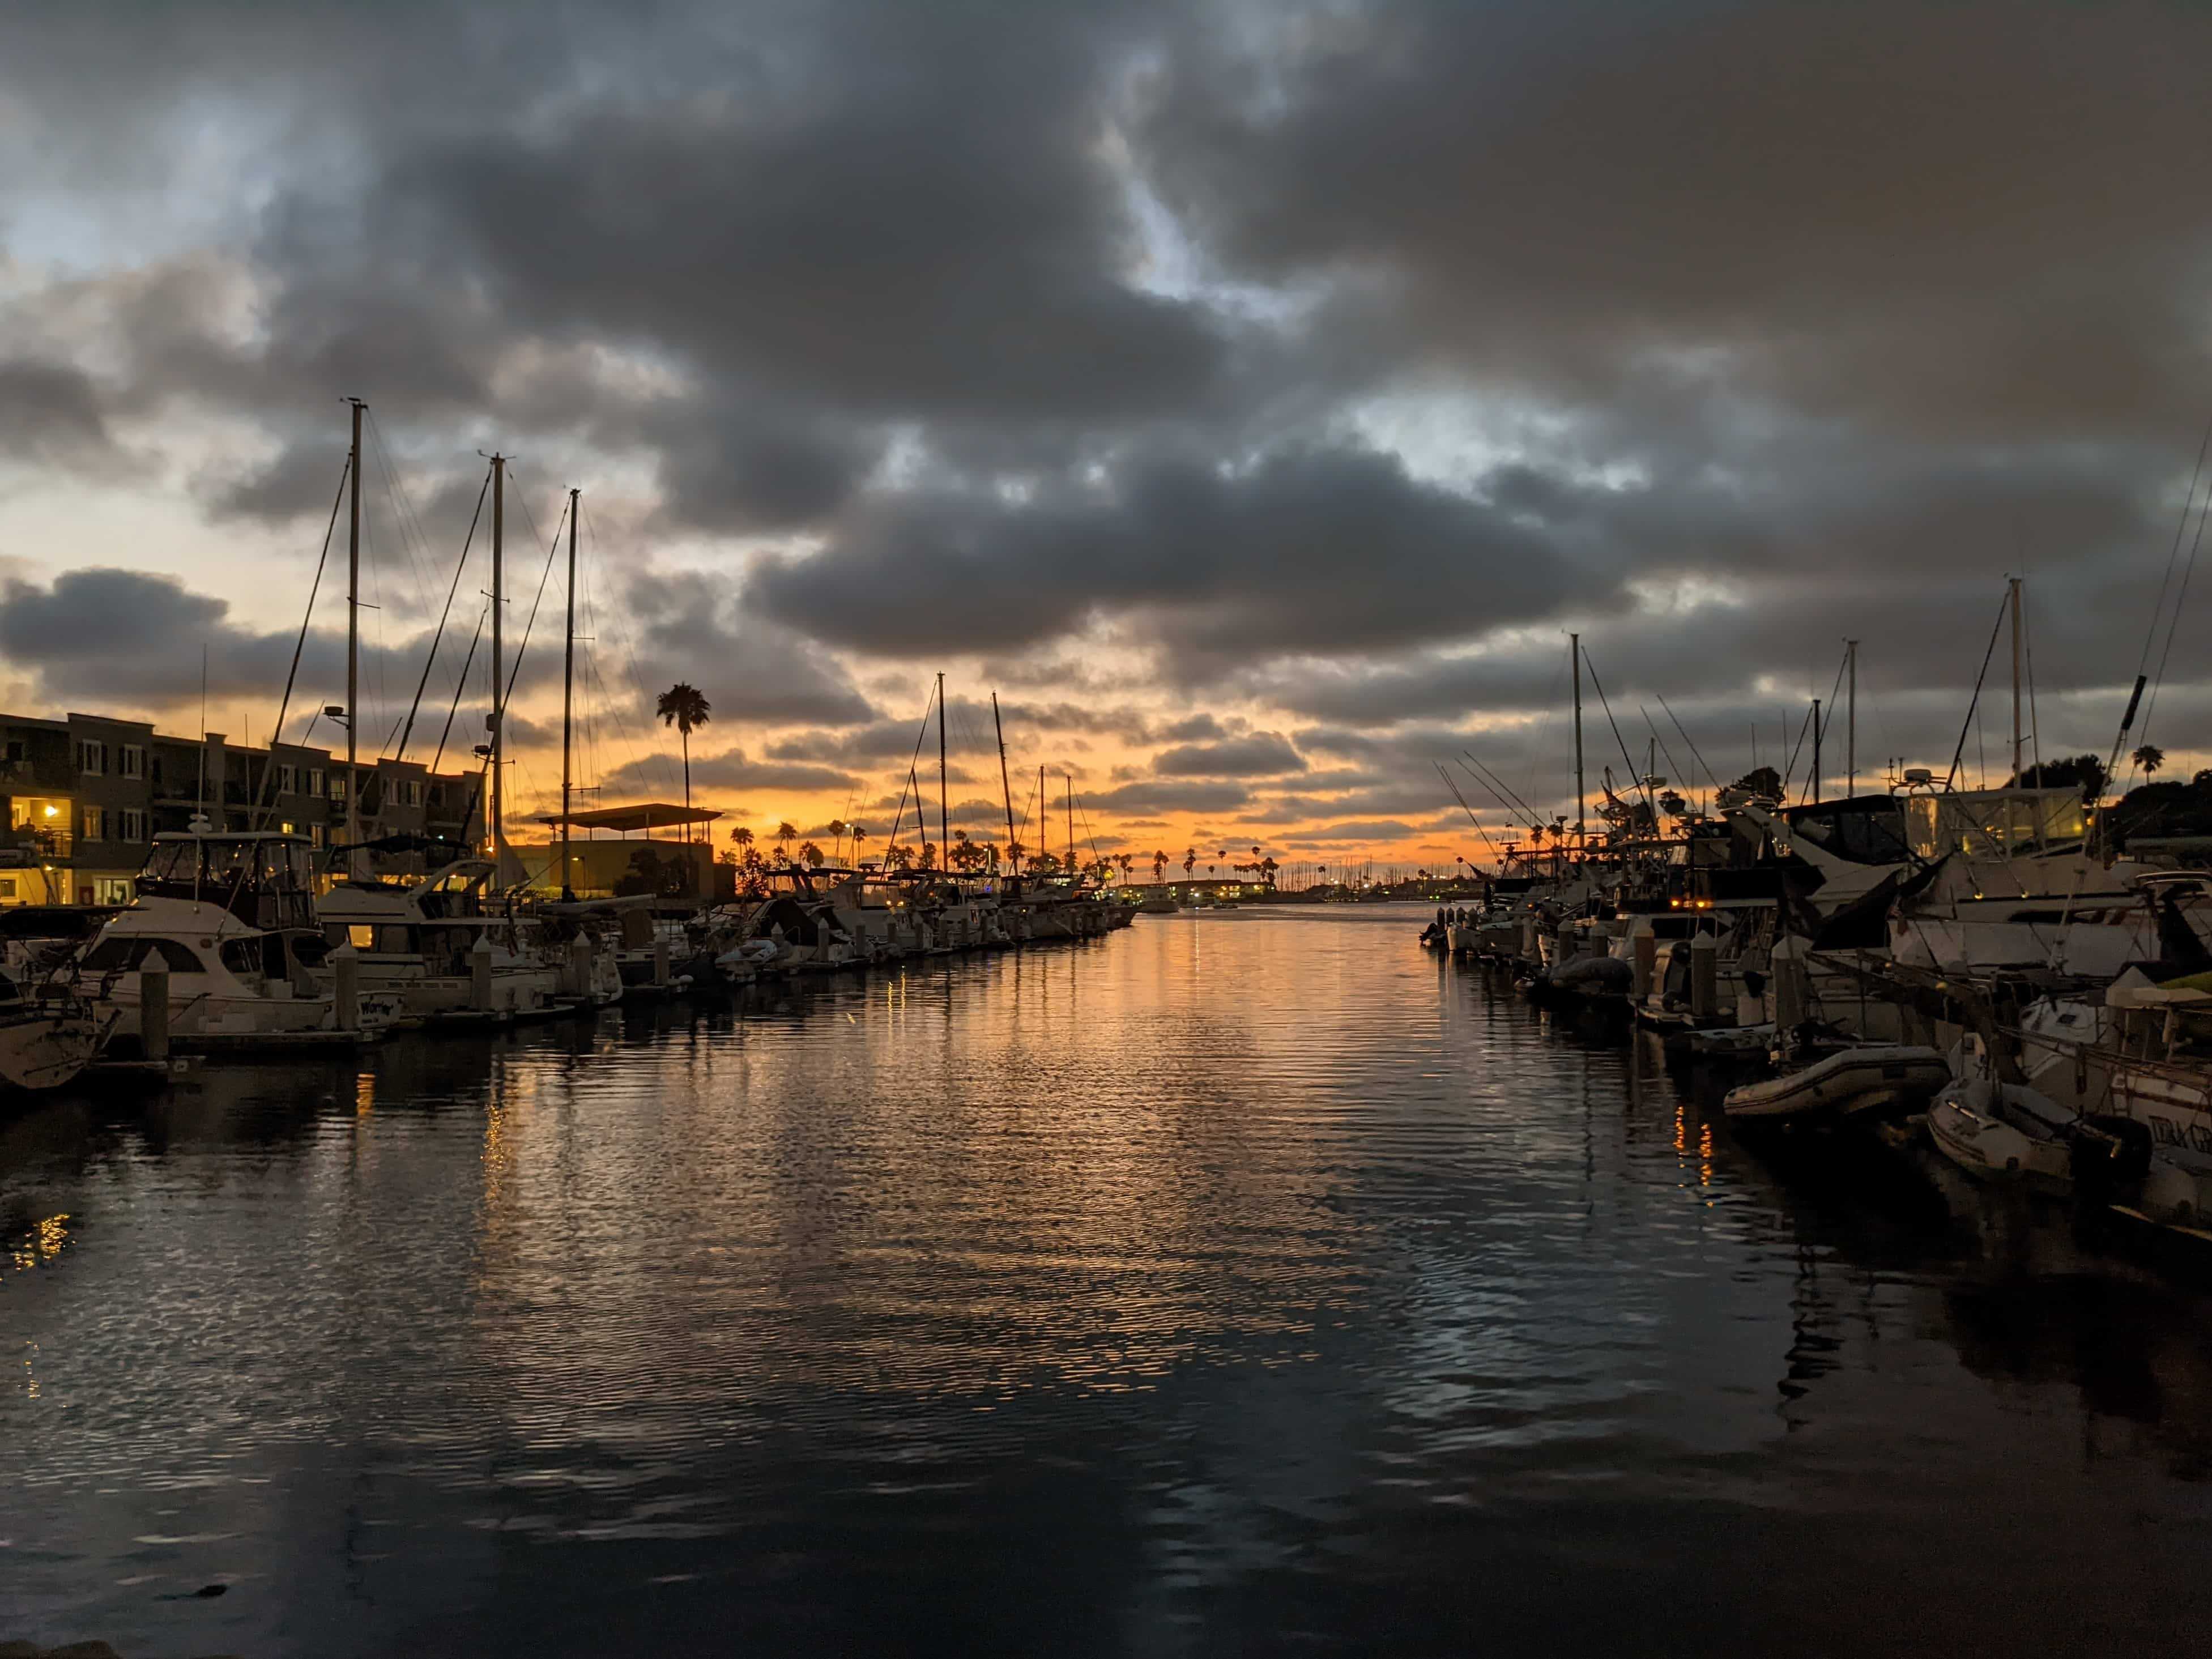 a sunset over a harbor full of boats.